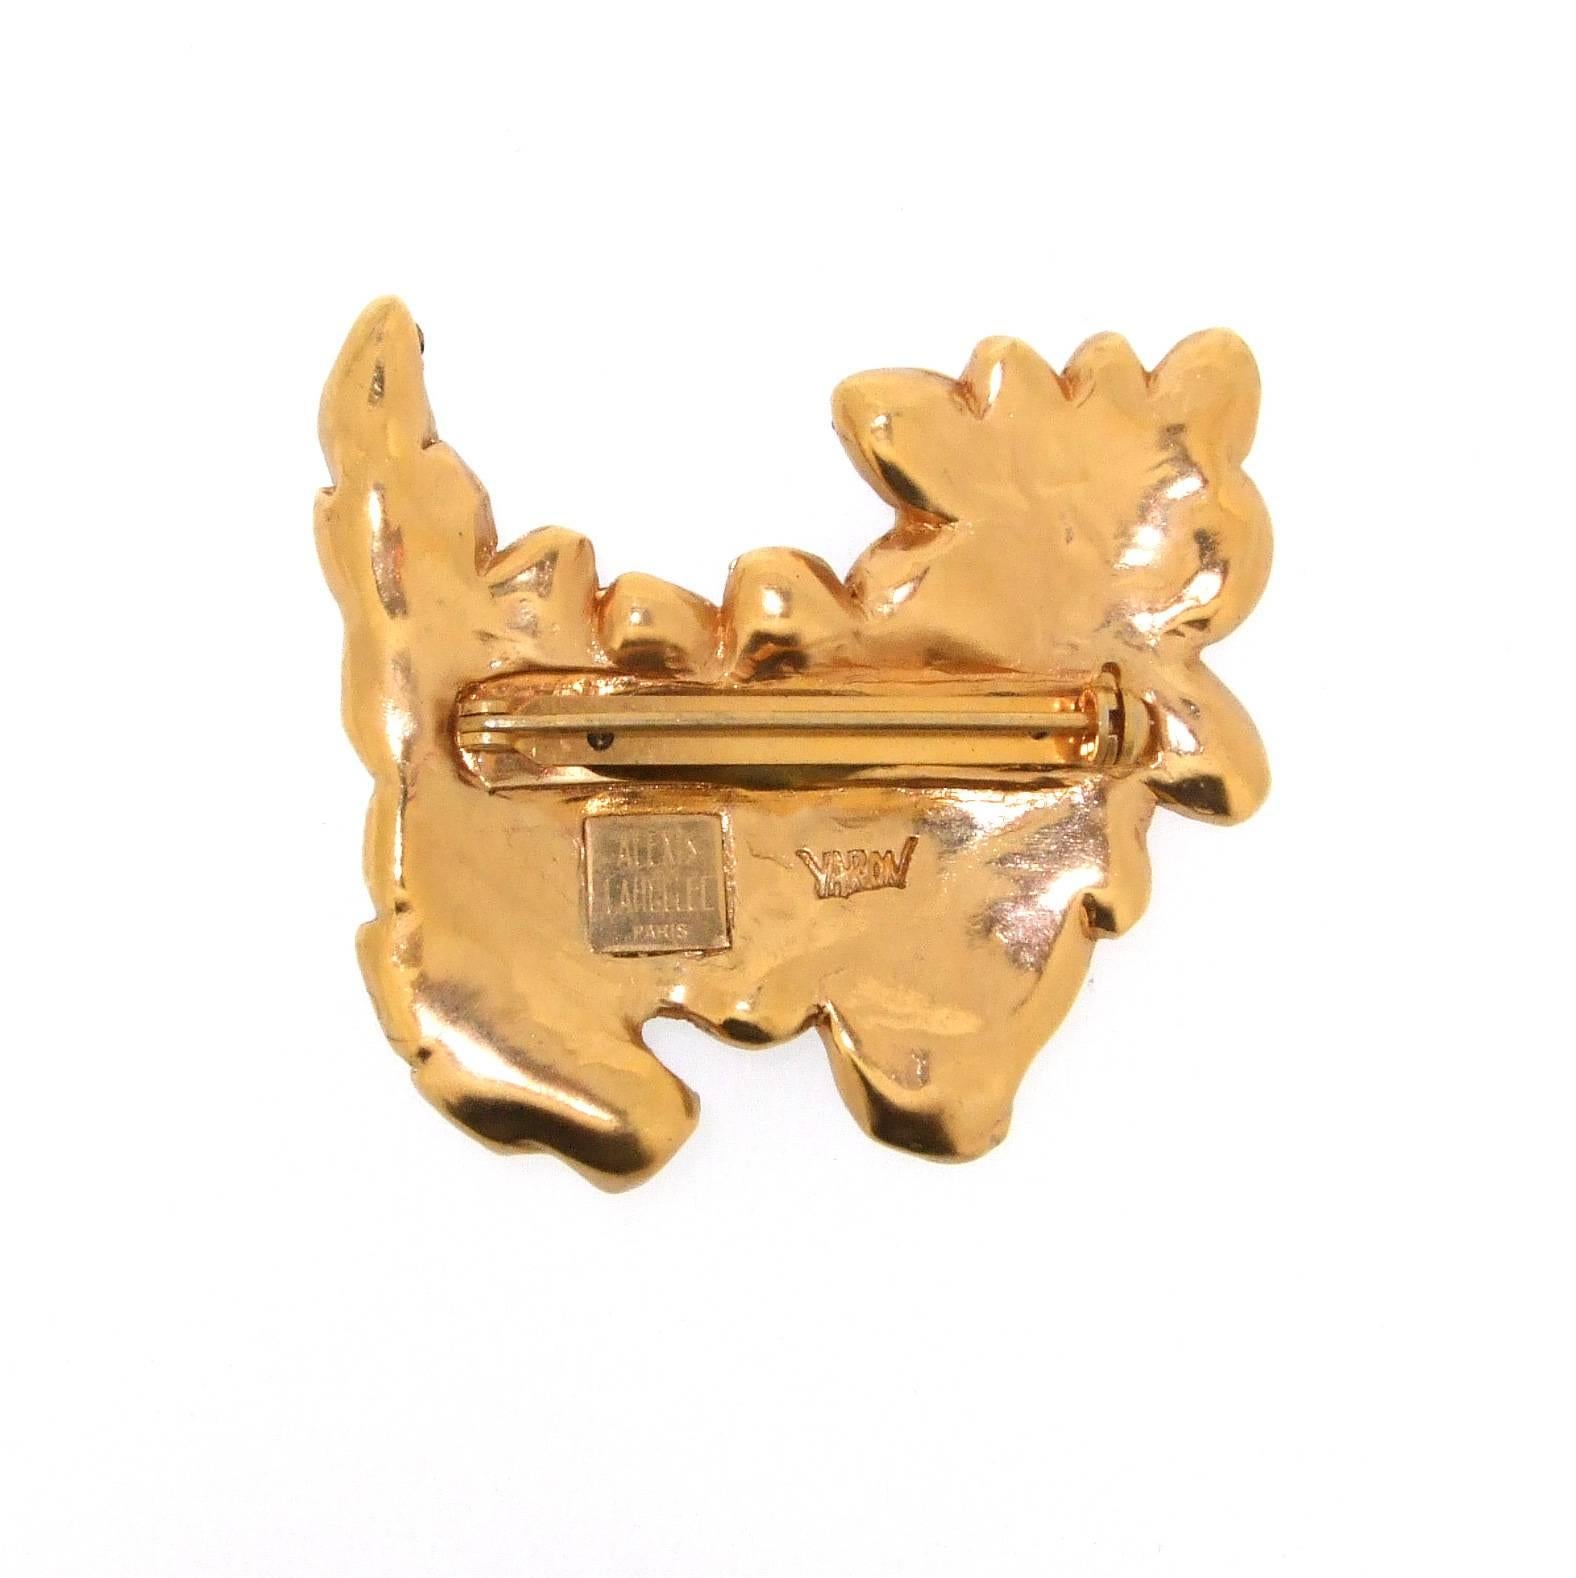 A fun abstract blue dog brooch by Alexis Lahellec in gold tone costume metal encrusted with with blue glass stones. It measures 7cm wide by 6.1cm high.